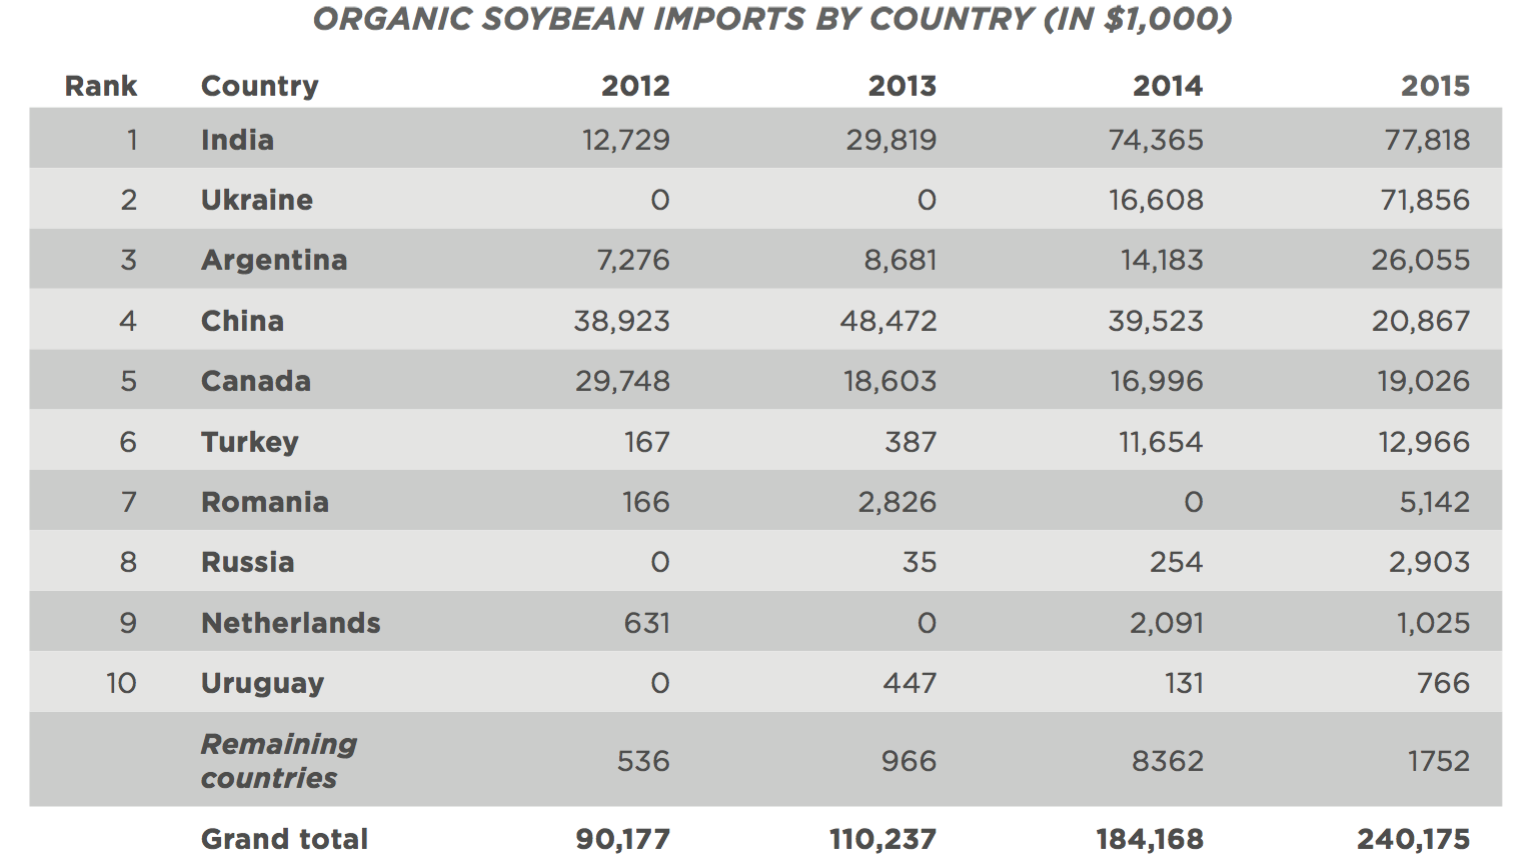 Organic soybean imports by country